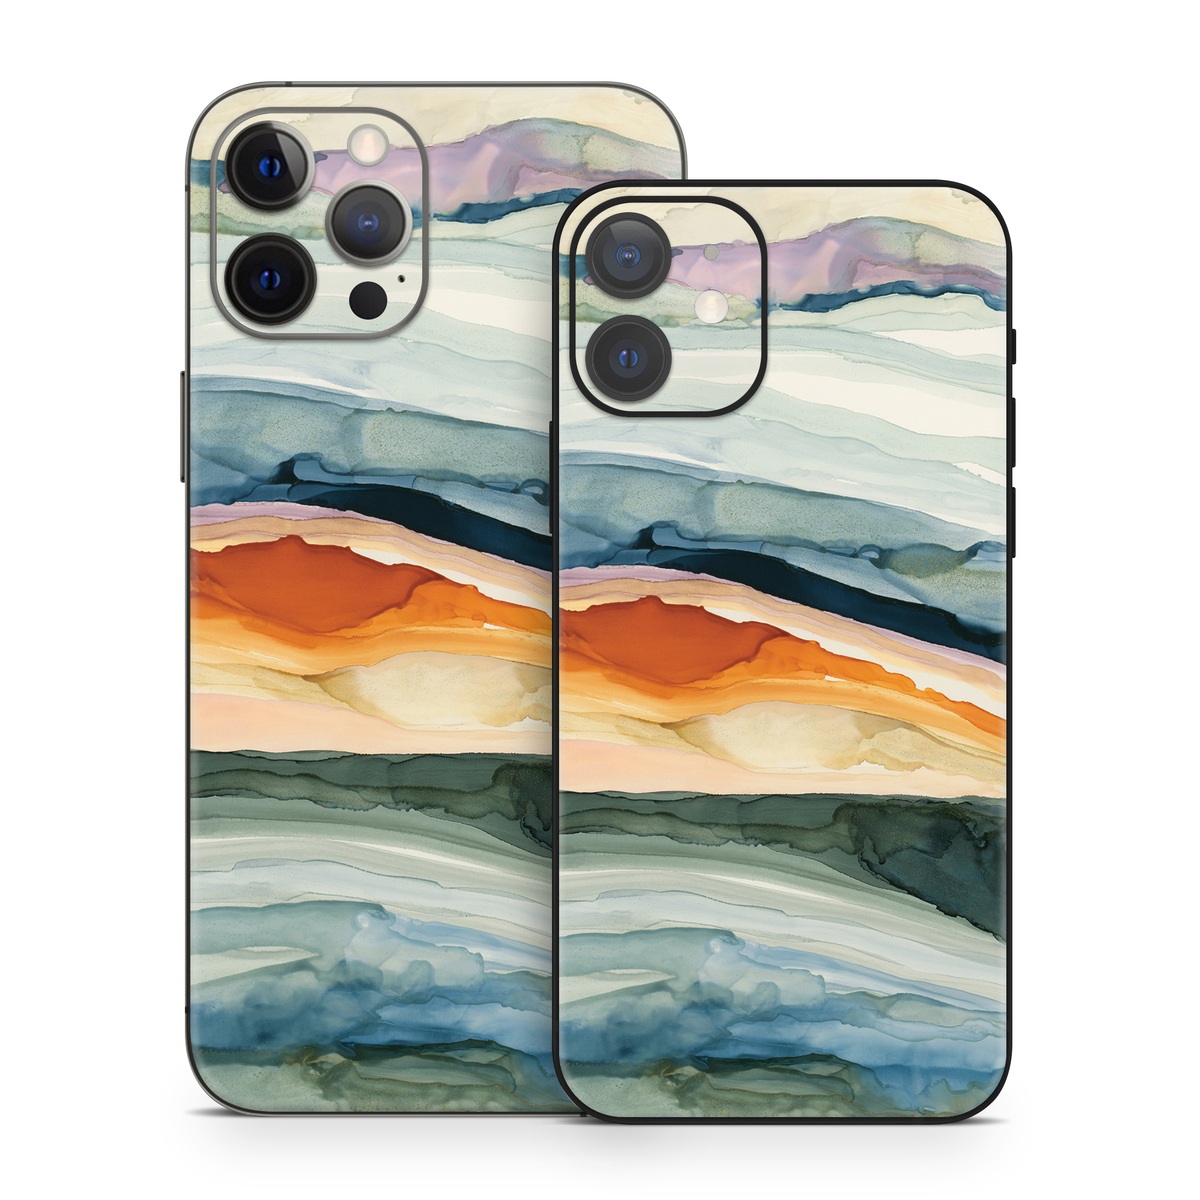 iPhone 12 Skin design of Watercolor paint, Painting, Sky, Wave, Geology, Landscape, Pattern, Acrylic paint, Cloud, Paint with blue, purple, orange, yellow, red, green, brown colors